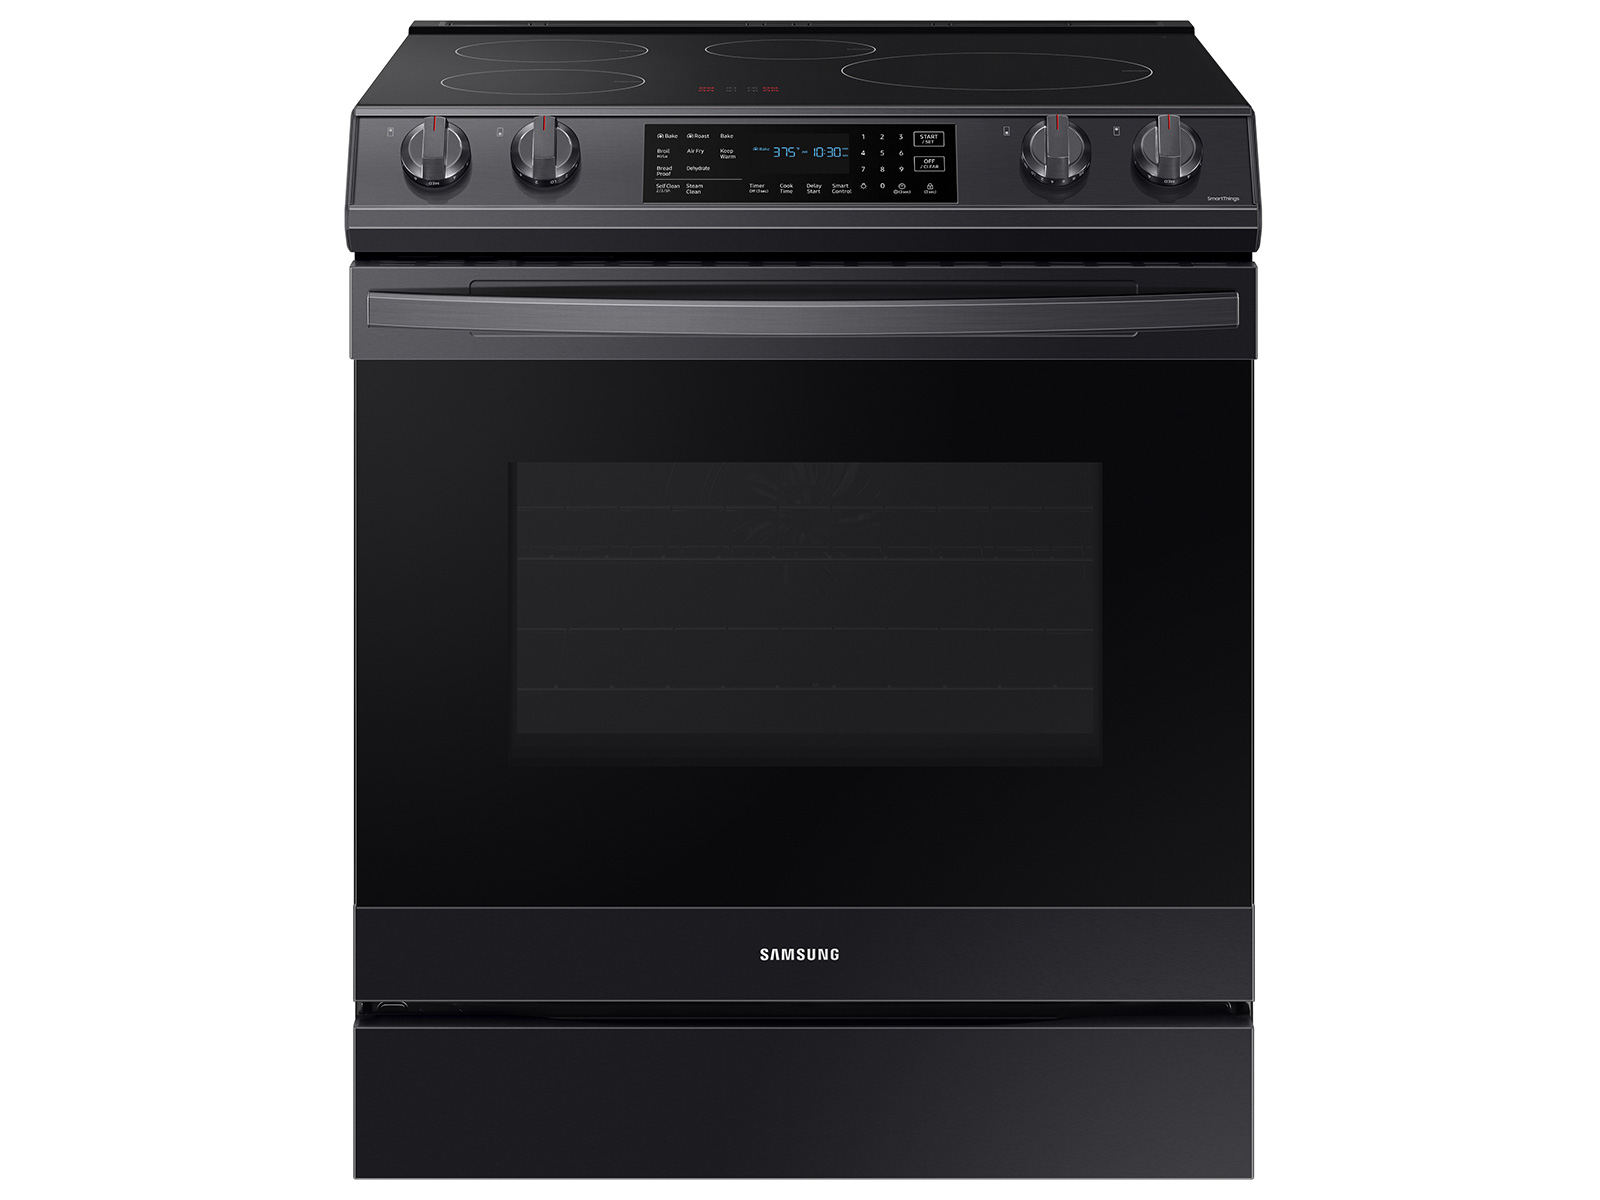 Calphalon Performance Dual Oven with Air Fry, Dark Stainless